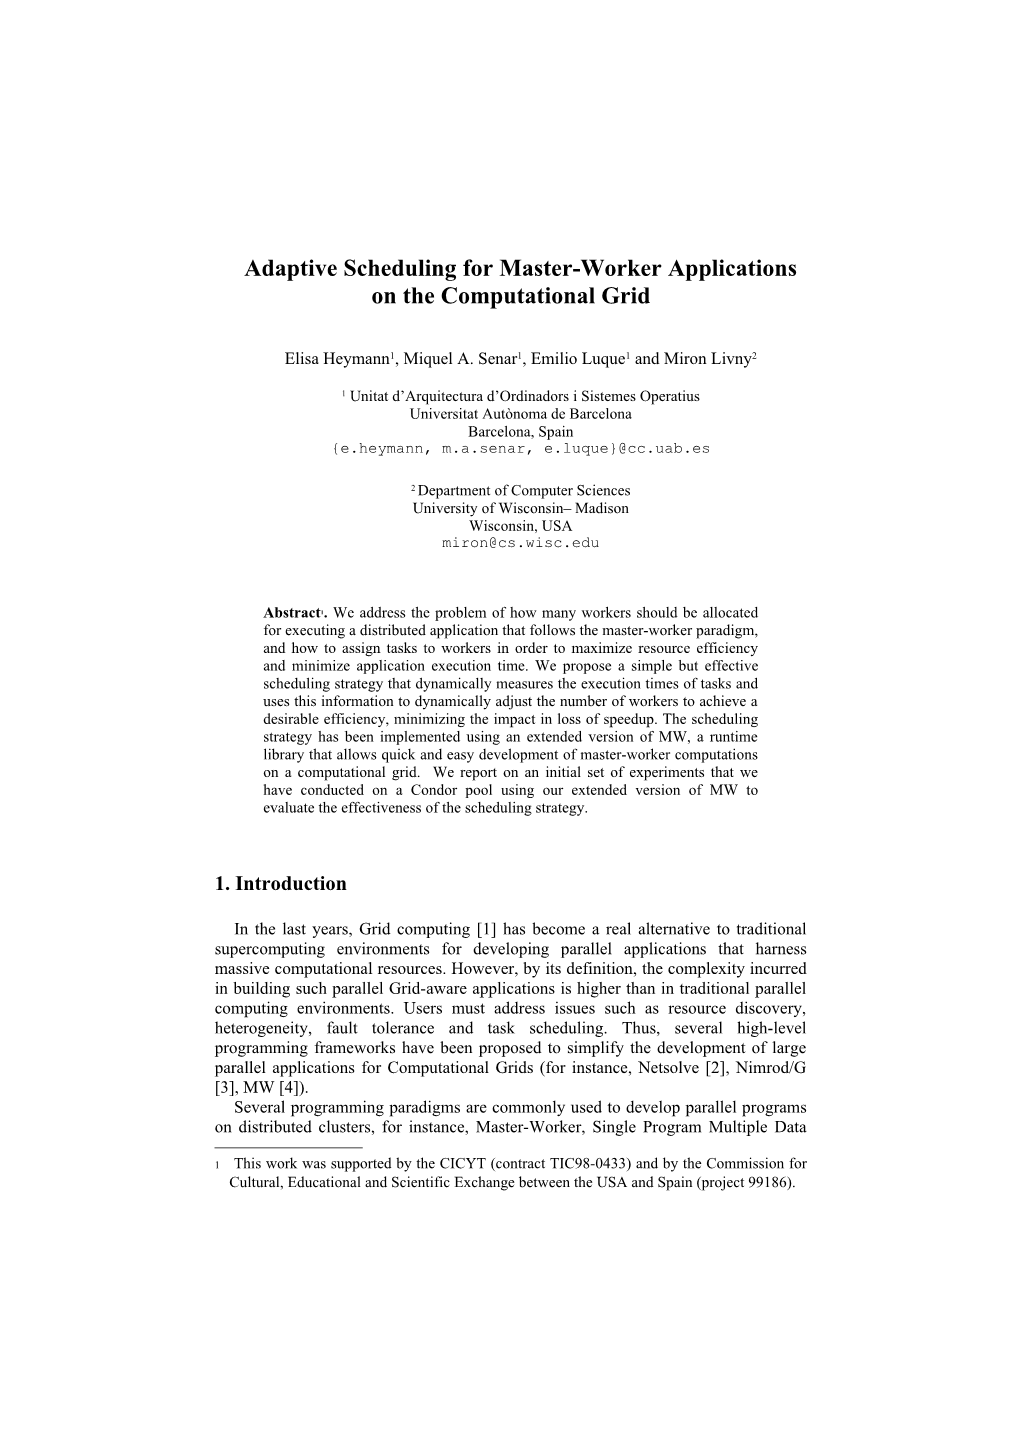 Adaptive Scheduling for Master-Worker Applications on the Computational Grid